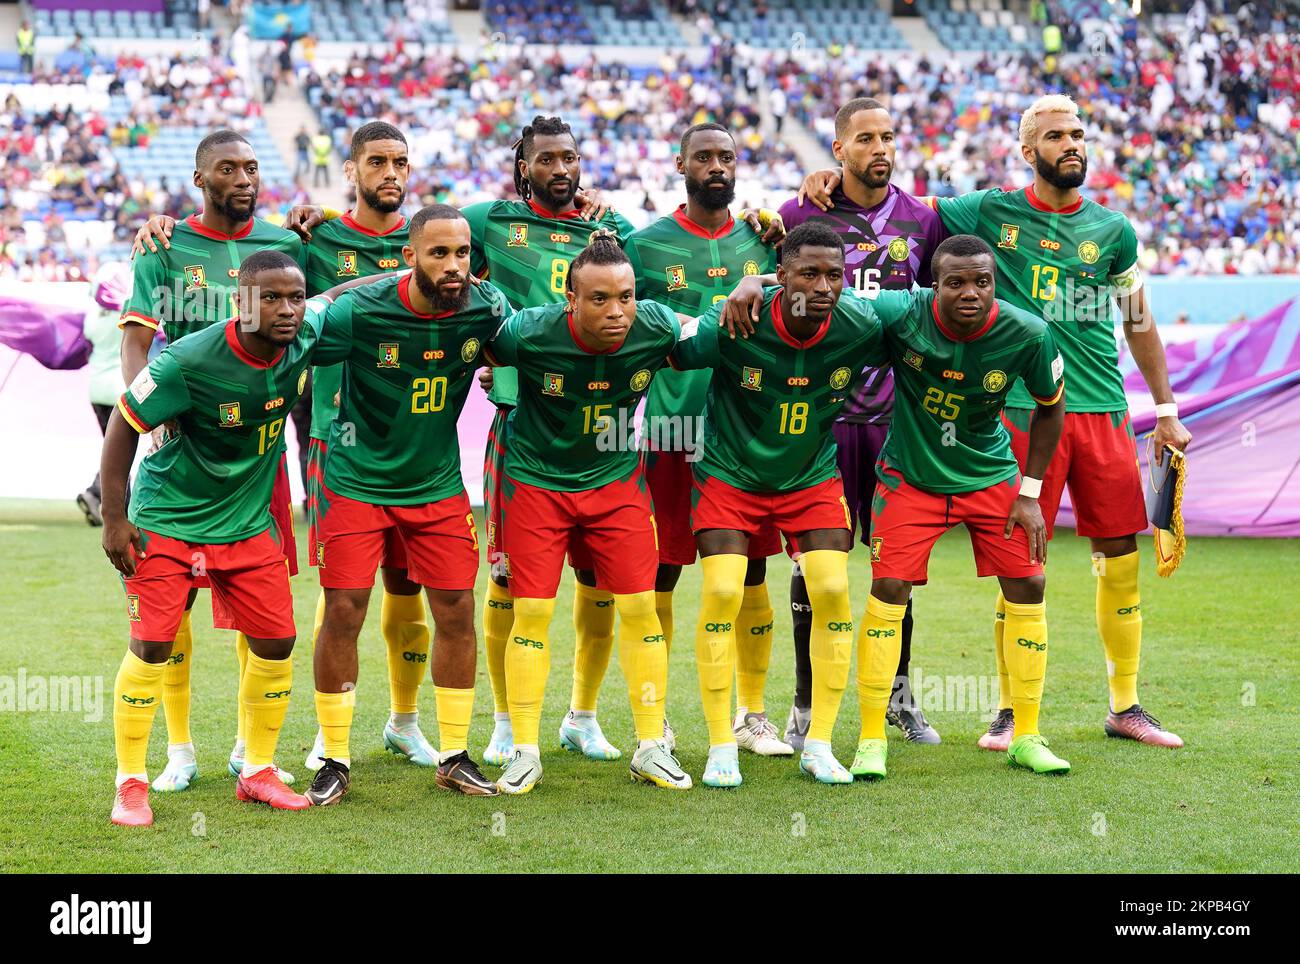 Cameroon starting line up - goalkeeper Devis Epassy, Nicolas Nkoulou, Collins Fai, Jean-Charles Castelletto, Tolo Nouhou, Andre-Frank Zambo Anguissa, Pierre Kunde, Martin Hongla, Karl Toko Ekambi, Eric Maxim Choupo-Moting and Bryan Mbeumo during the FIFA World Cup Group G match at the Al Janoub Stadium in Al Wakrah, Qatar. Picture date: Monday November 28, 2022. Stock Photo